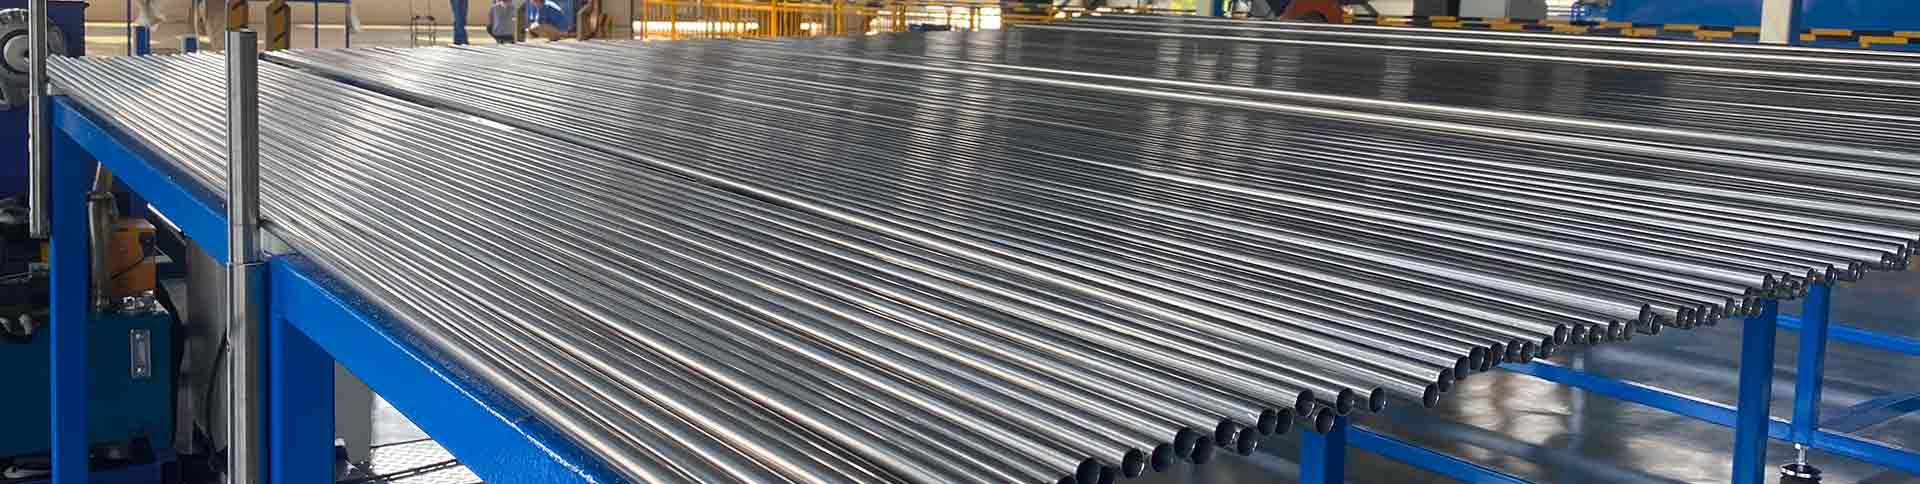 The Reason Why Stainless Steel Seamless Pipes are More Resistant to Wall Thickness Inconsistencies than Welded Pipes